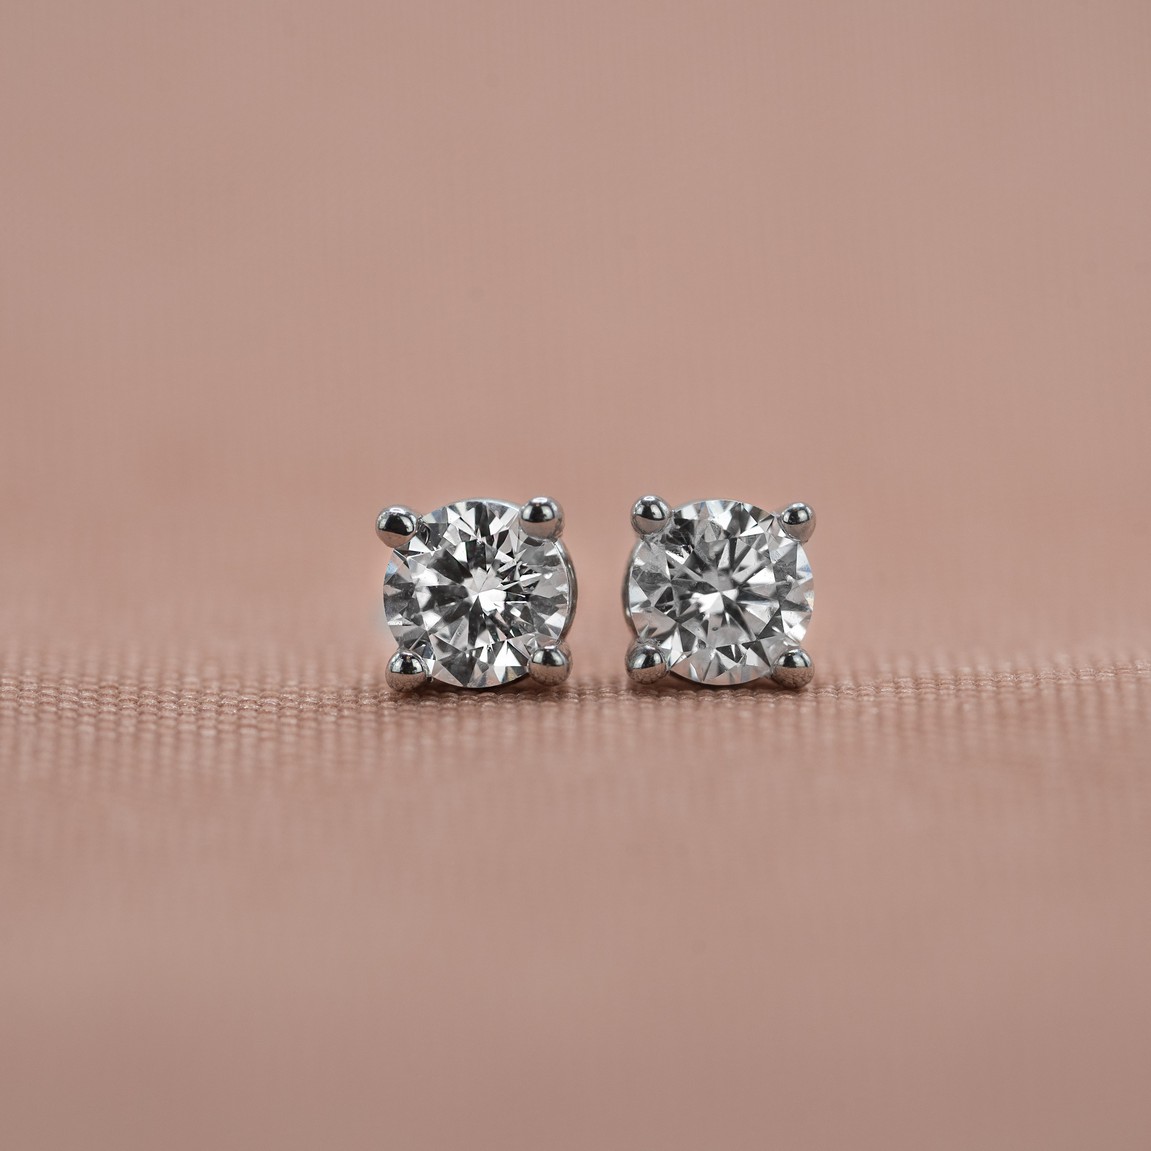 14K White Gold Lab-Created Diamond 4-Prong Stud Earrings (0.25 CTW F-G SI)